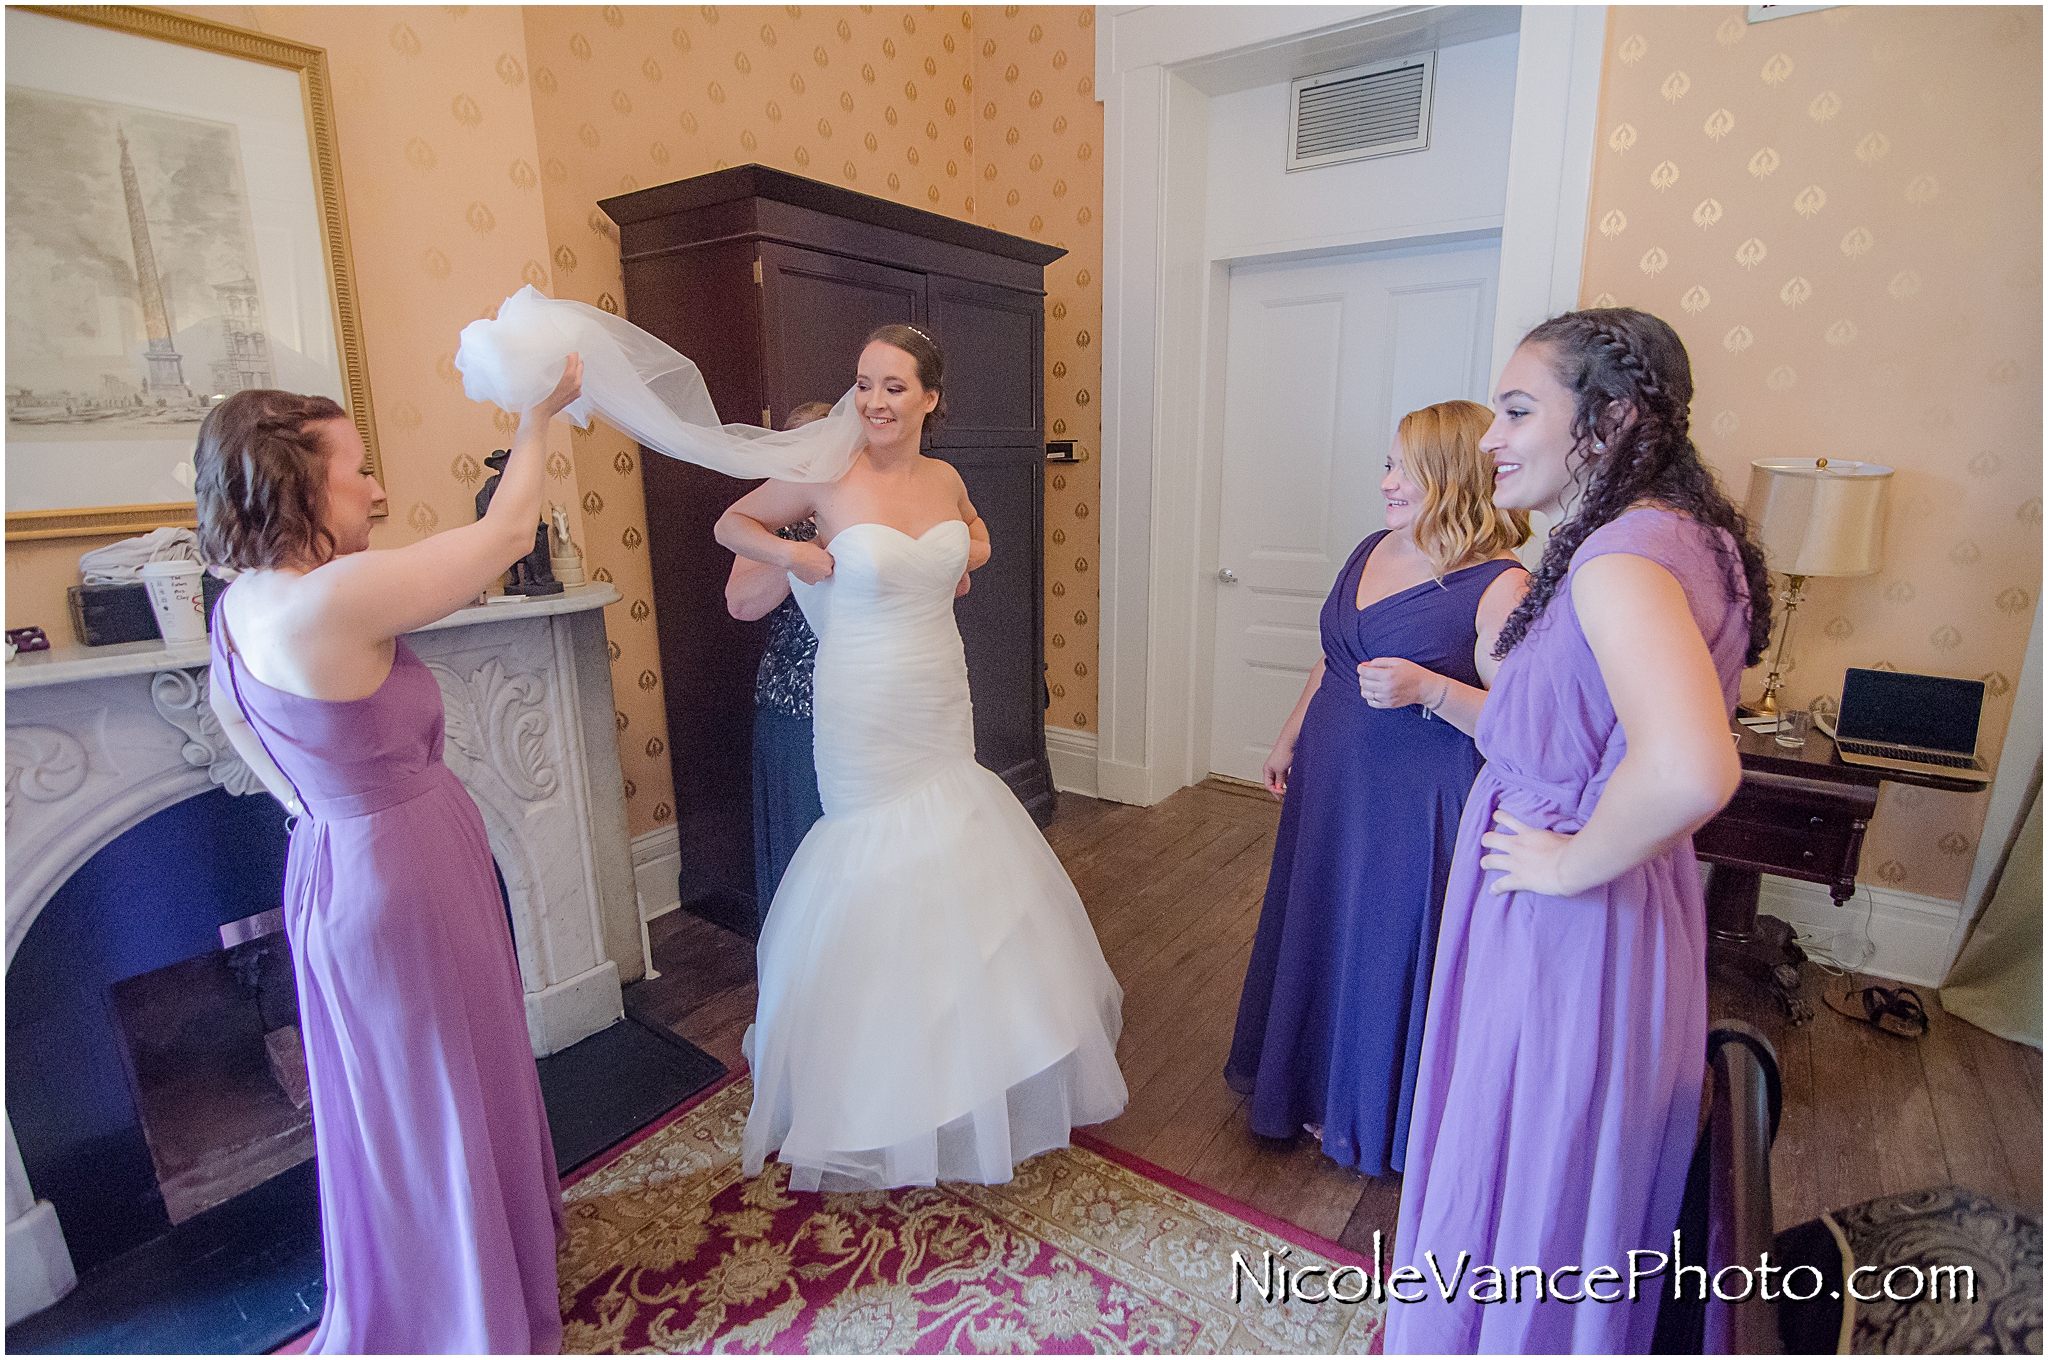 Her mom helps her get into her dress in the Bridal Suite at the Linden Row Inn.